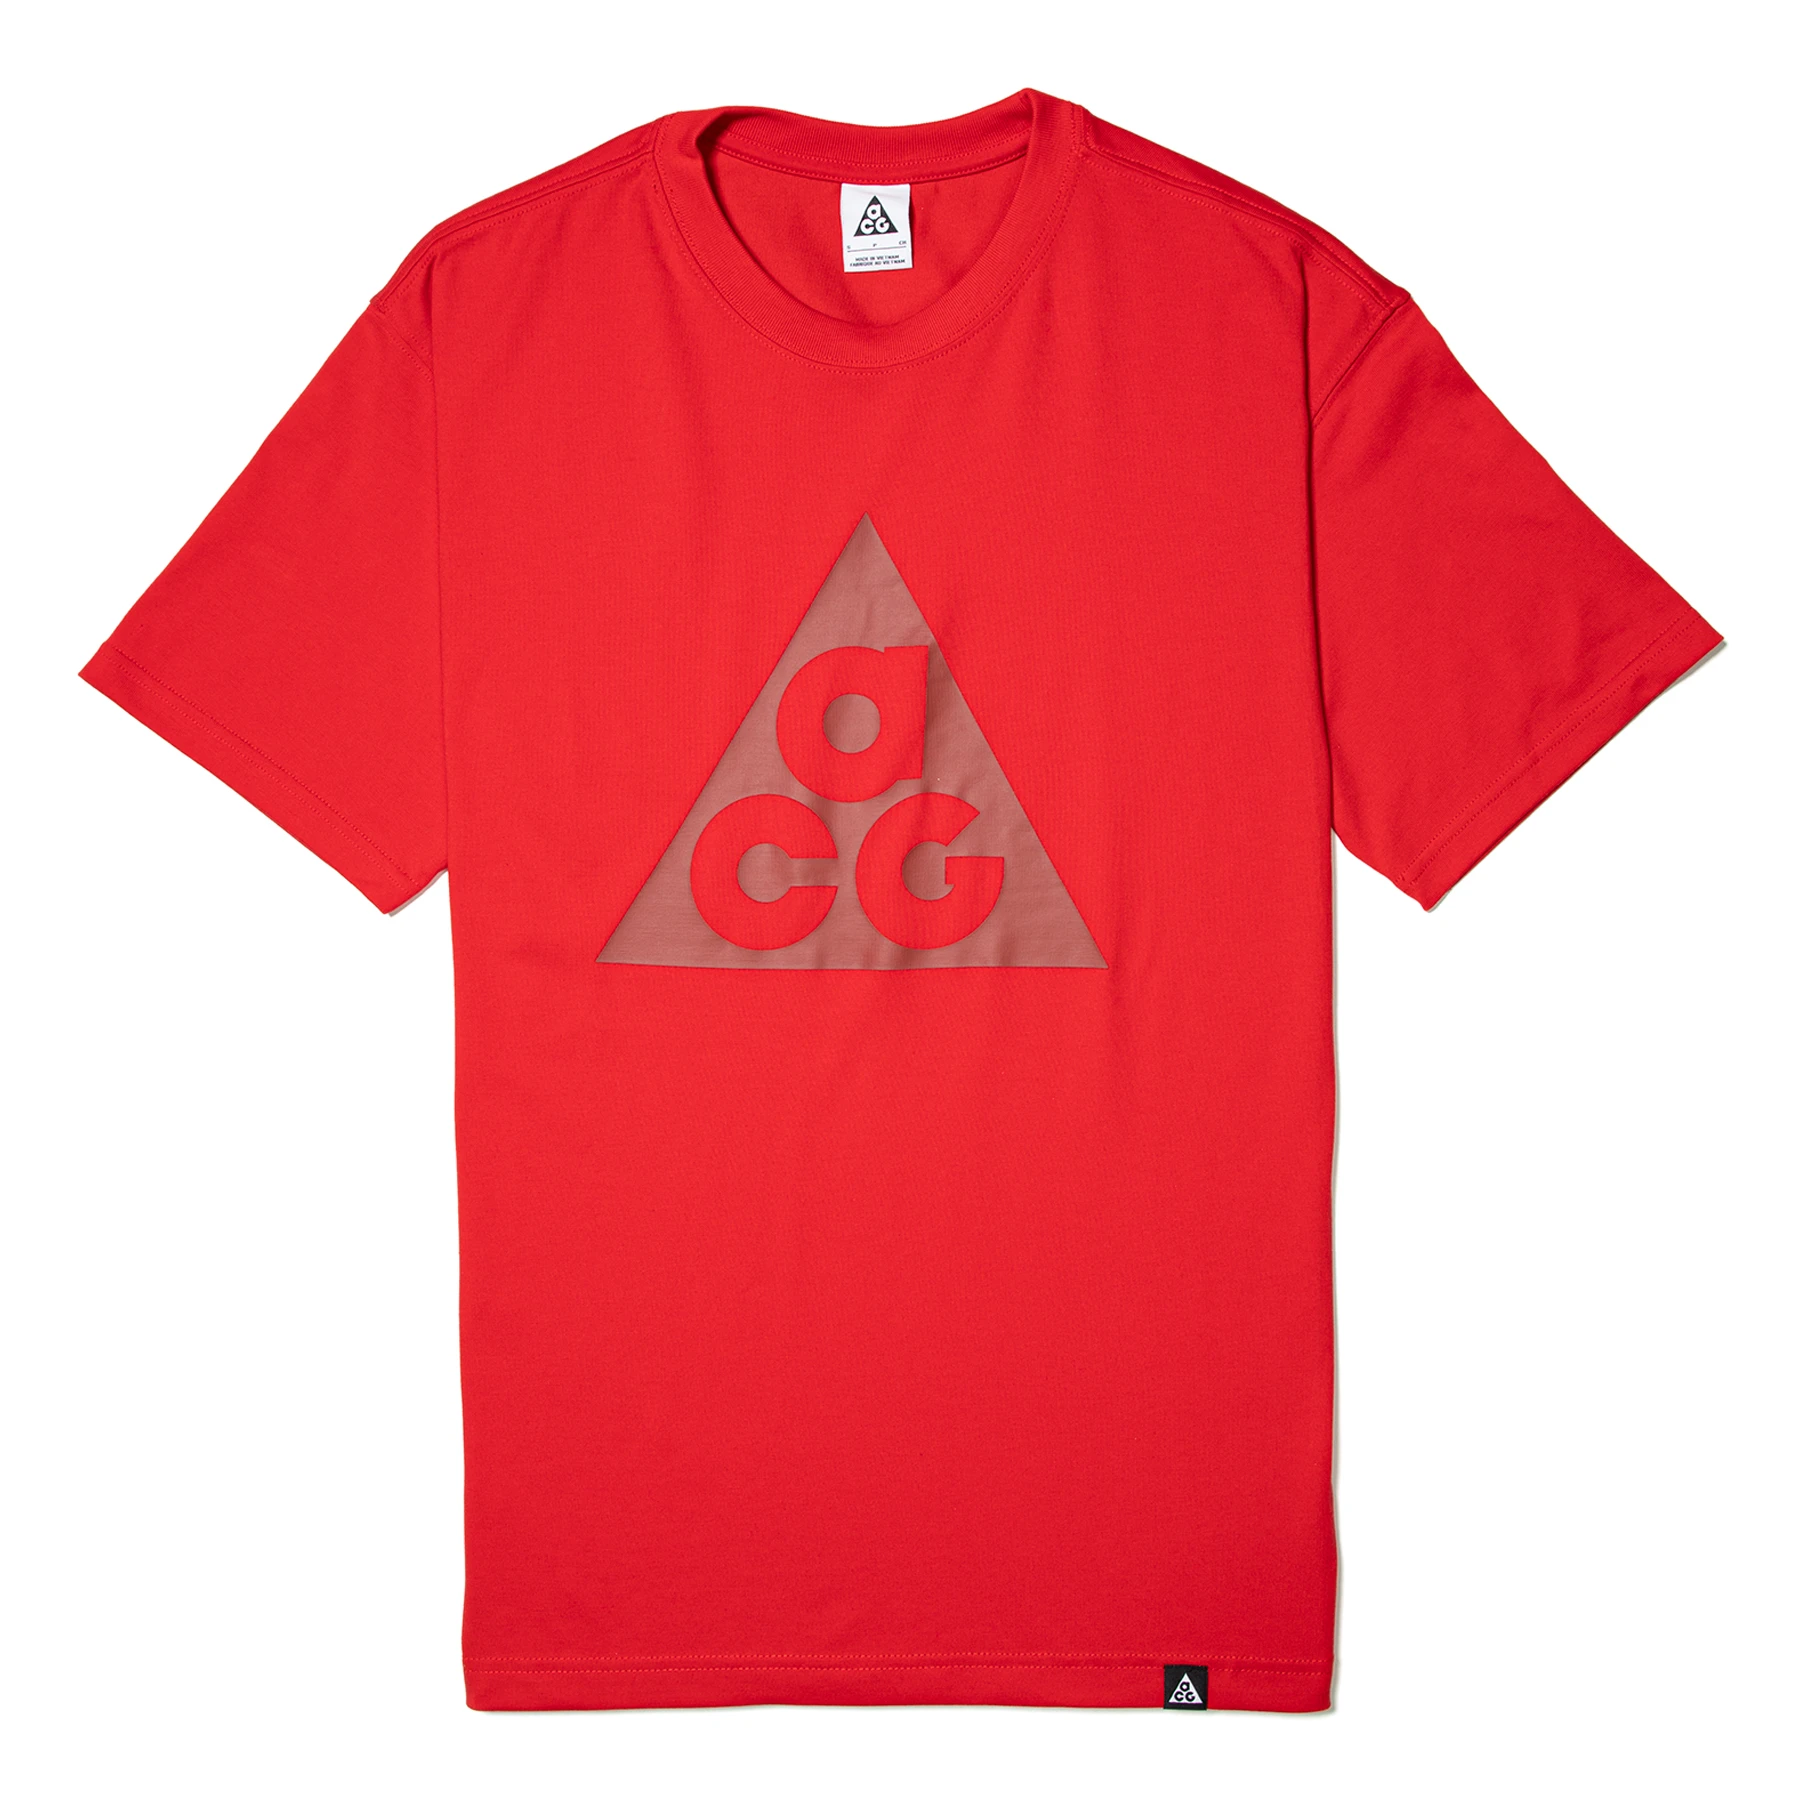 Nearly 50% OFF the Nike ACG T-shirt 